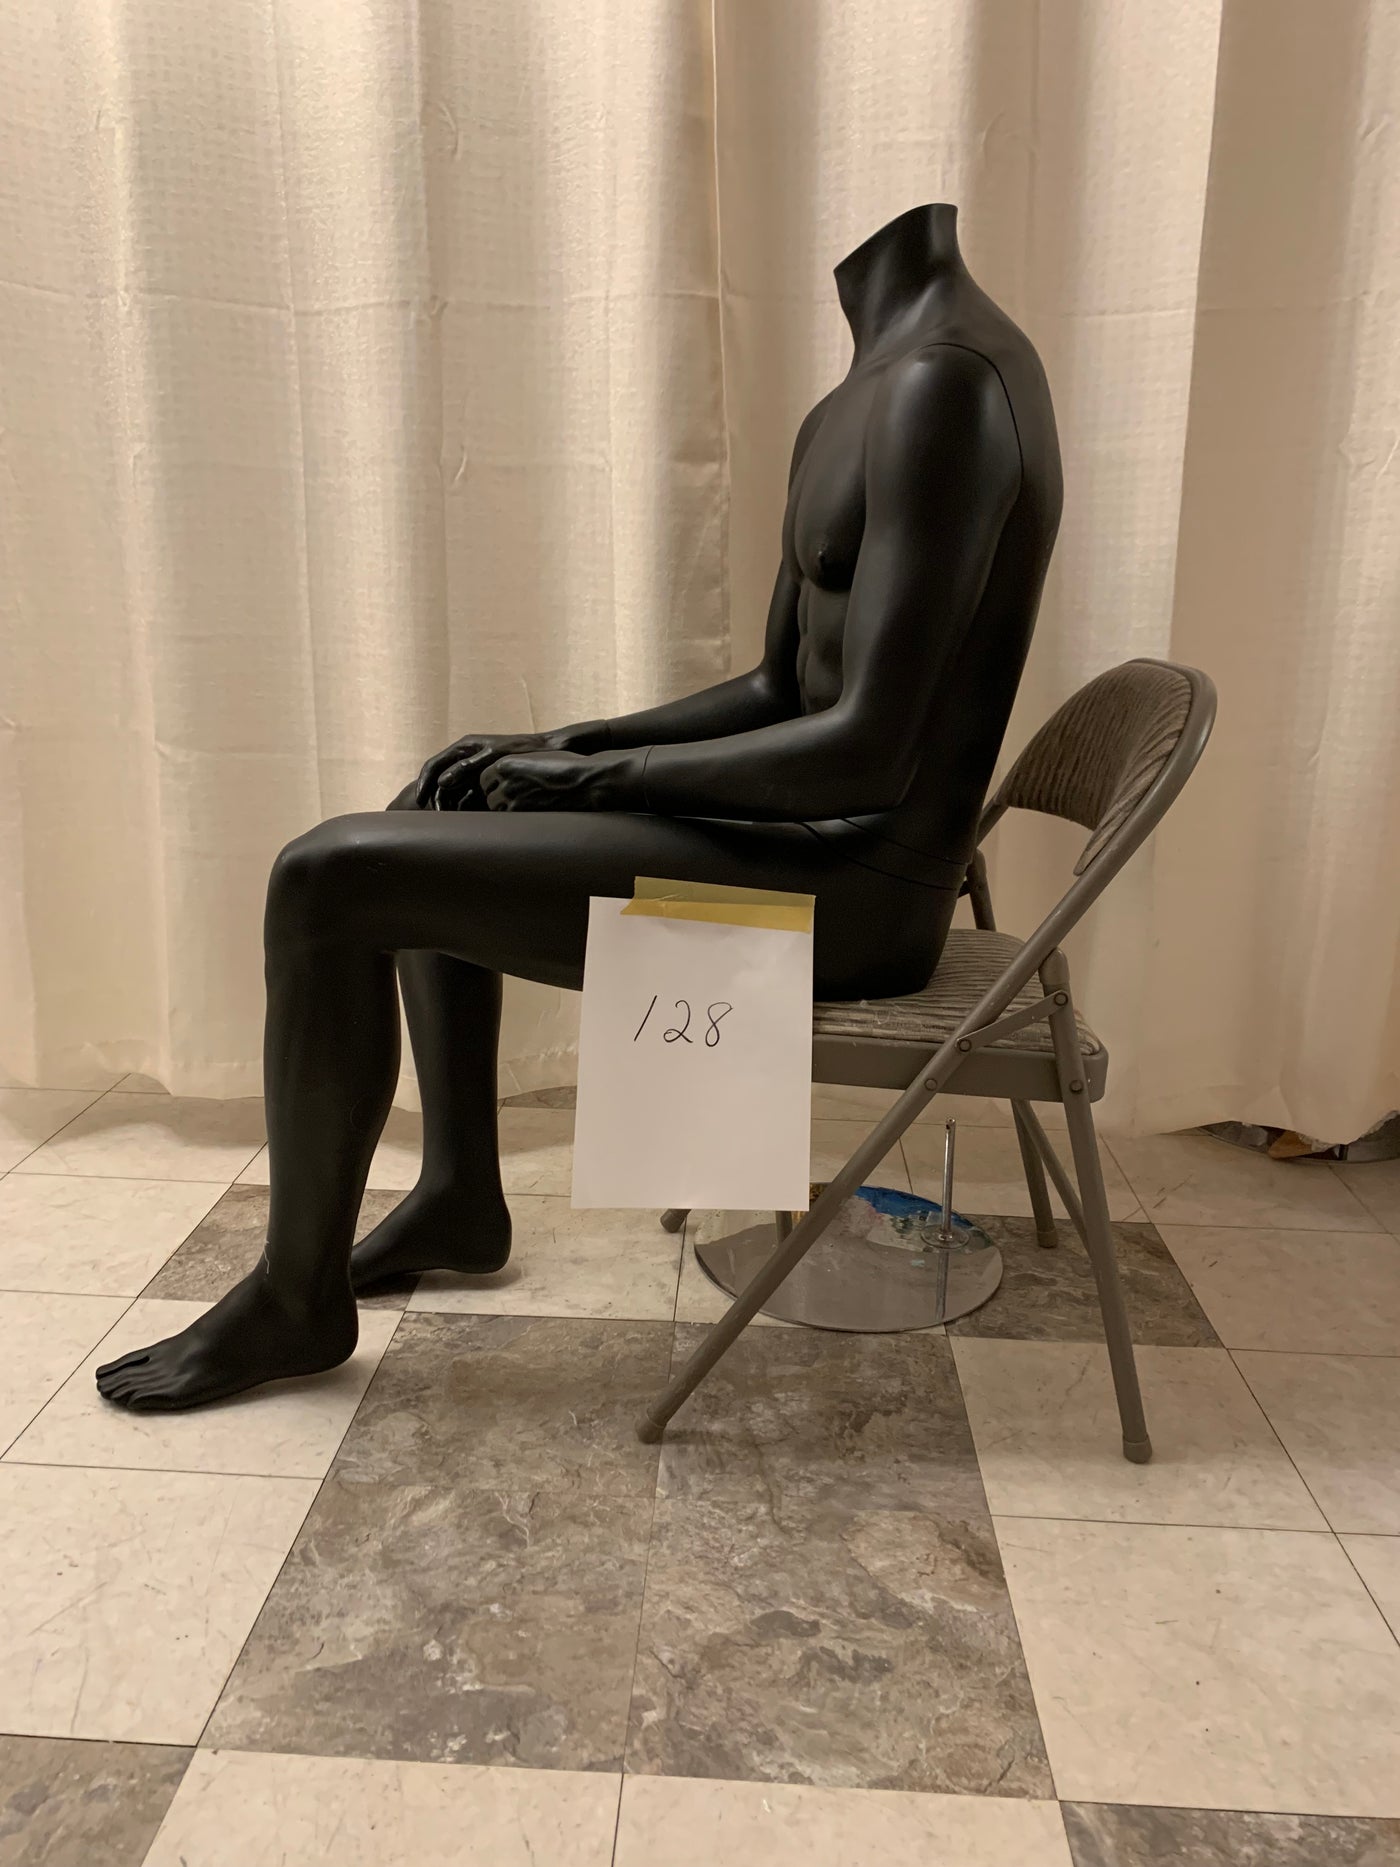 Used Headless Seated Male Mannequin - #128